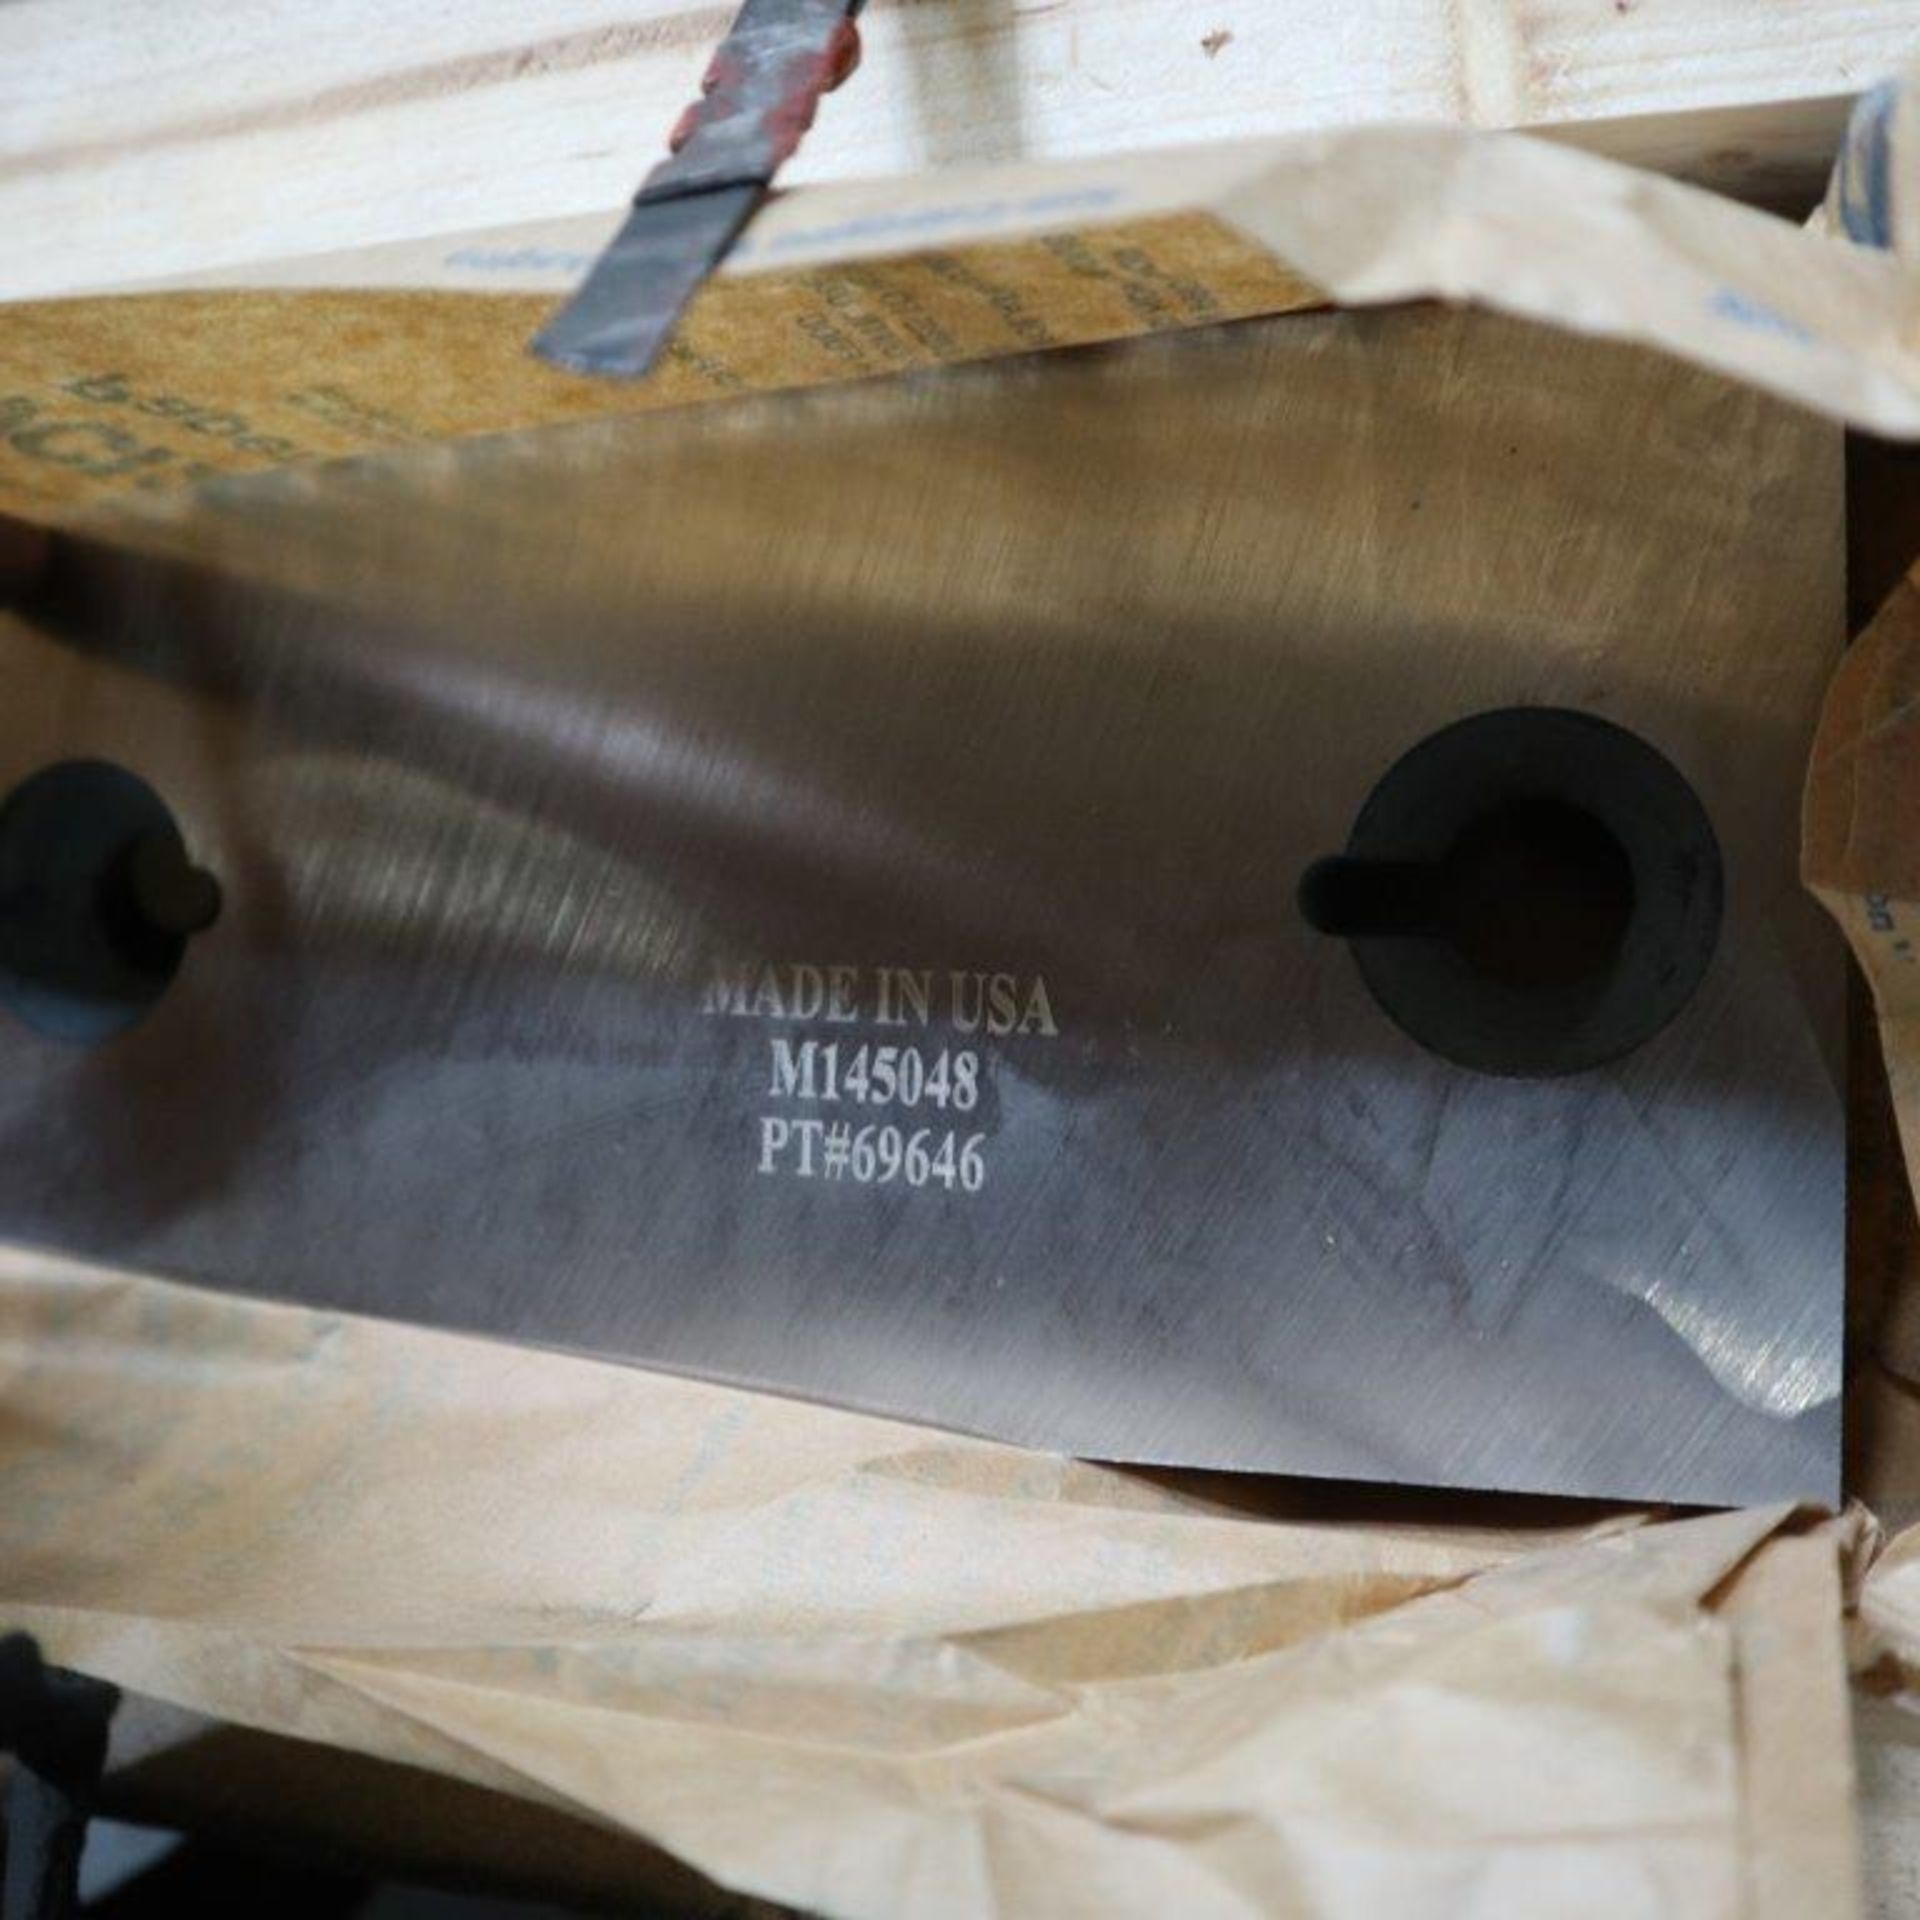 REPLACEMENT SHEAR BLADE FOR WYSONG PART # 69646, MFG # M145048, BLADE LENGTH 146" - Image 2 of 2